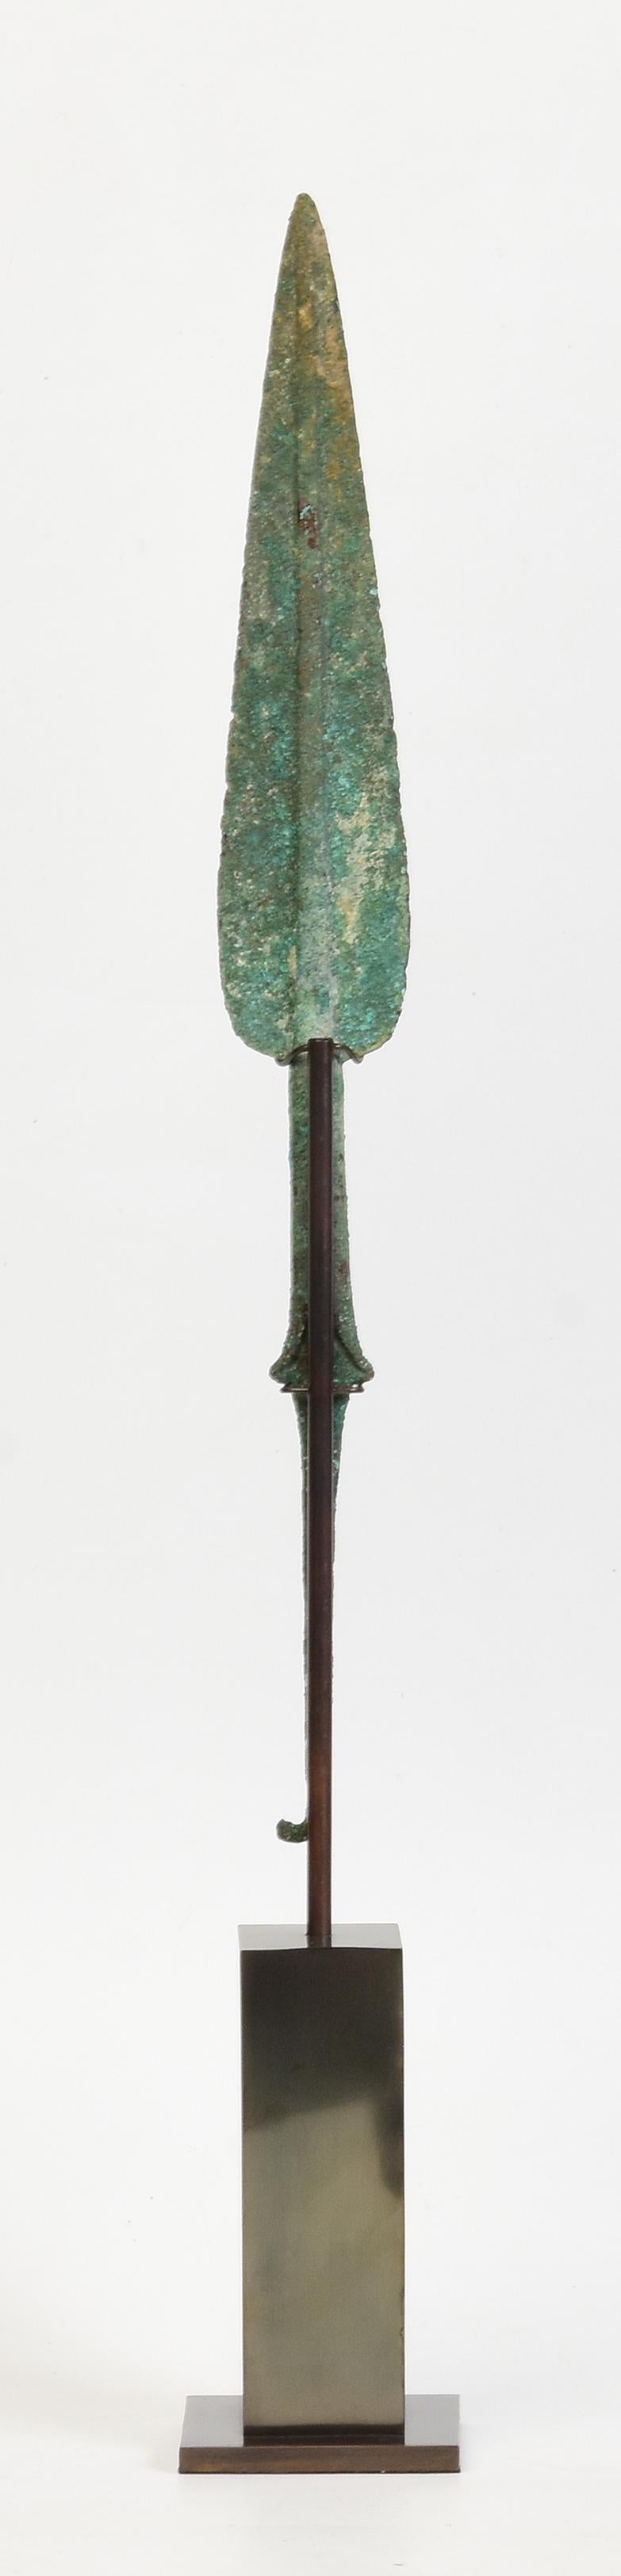 18th Century and Earlier Ancient Antique Luristan Bronze Spear Early Iron Age Weapon For Sale